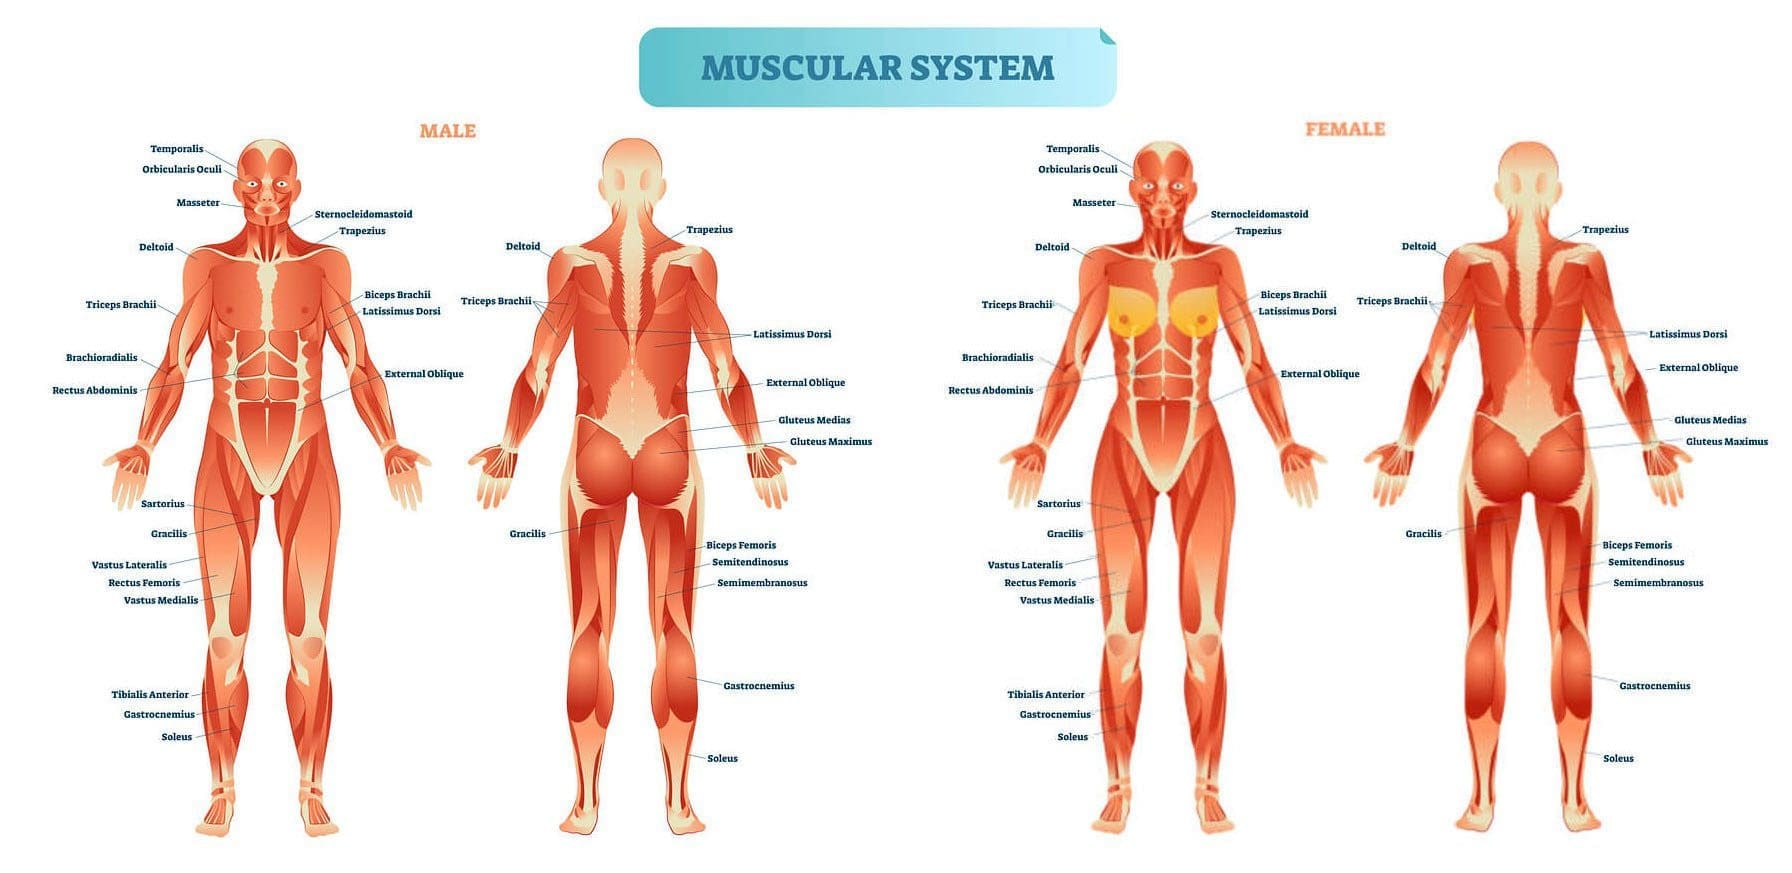 What Is Muscle Protein Synthesis? How to Increase Muscle Growth